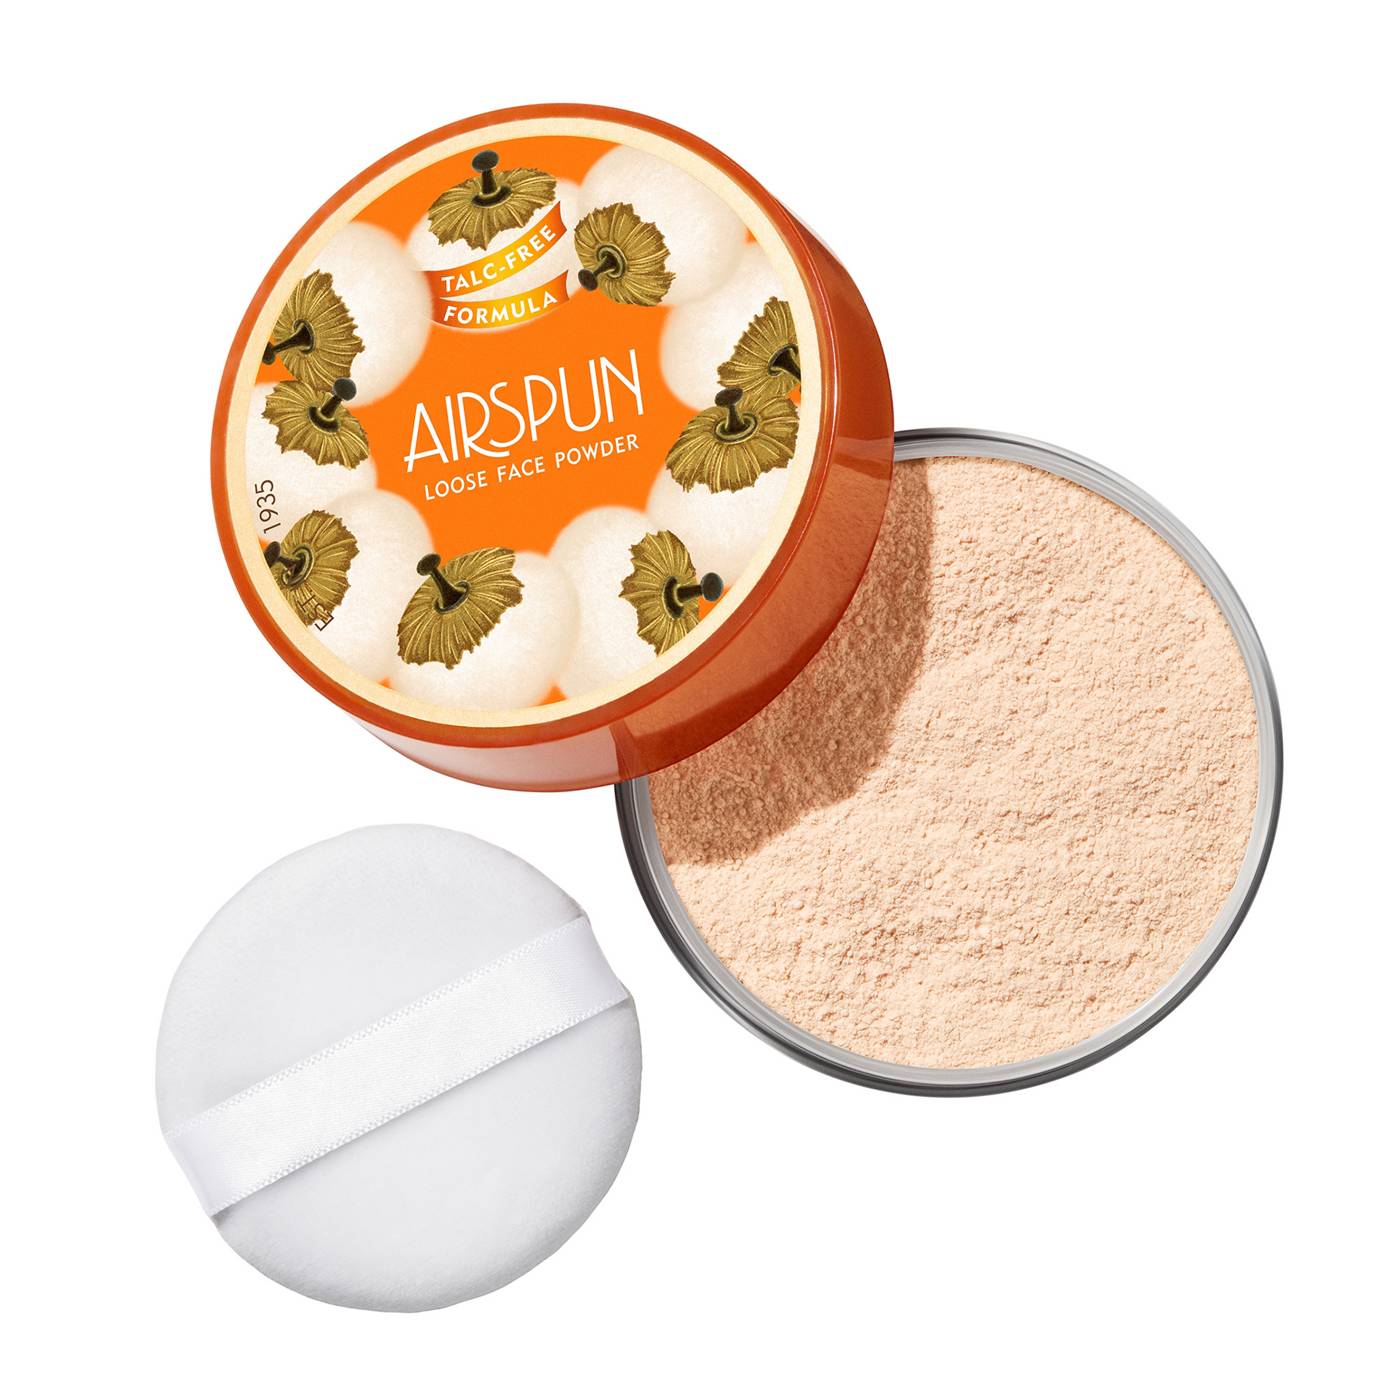 Coty Airspun Loose Face Powder - Naturally Neutral; image 4 of 6